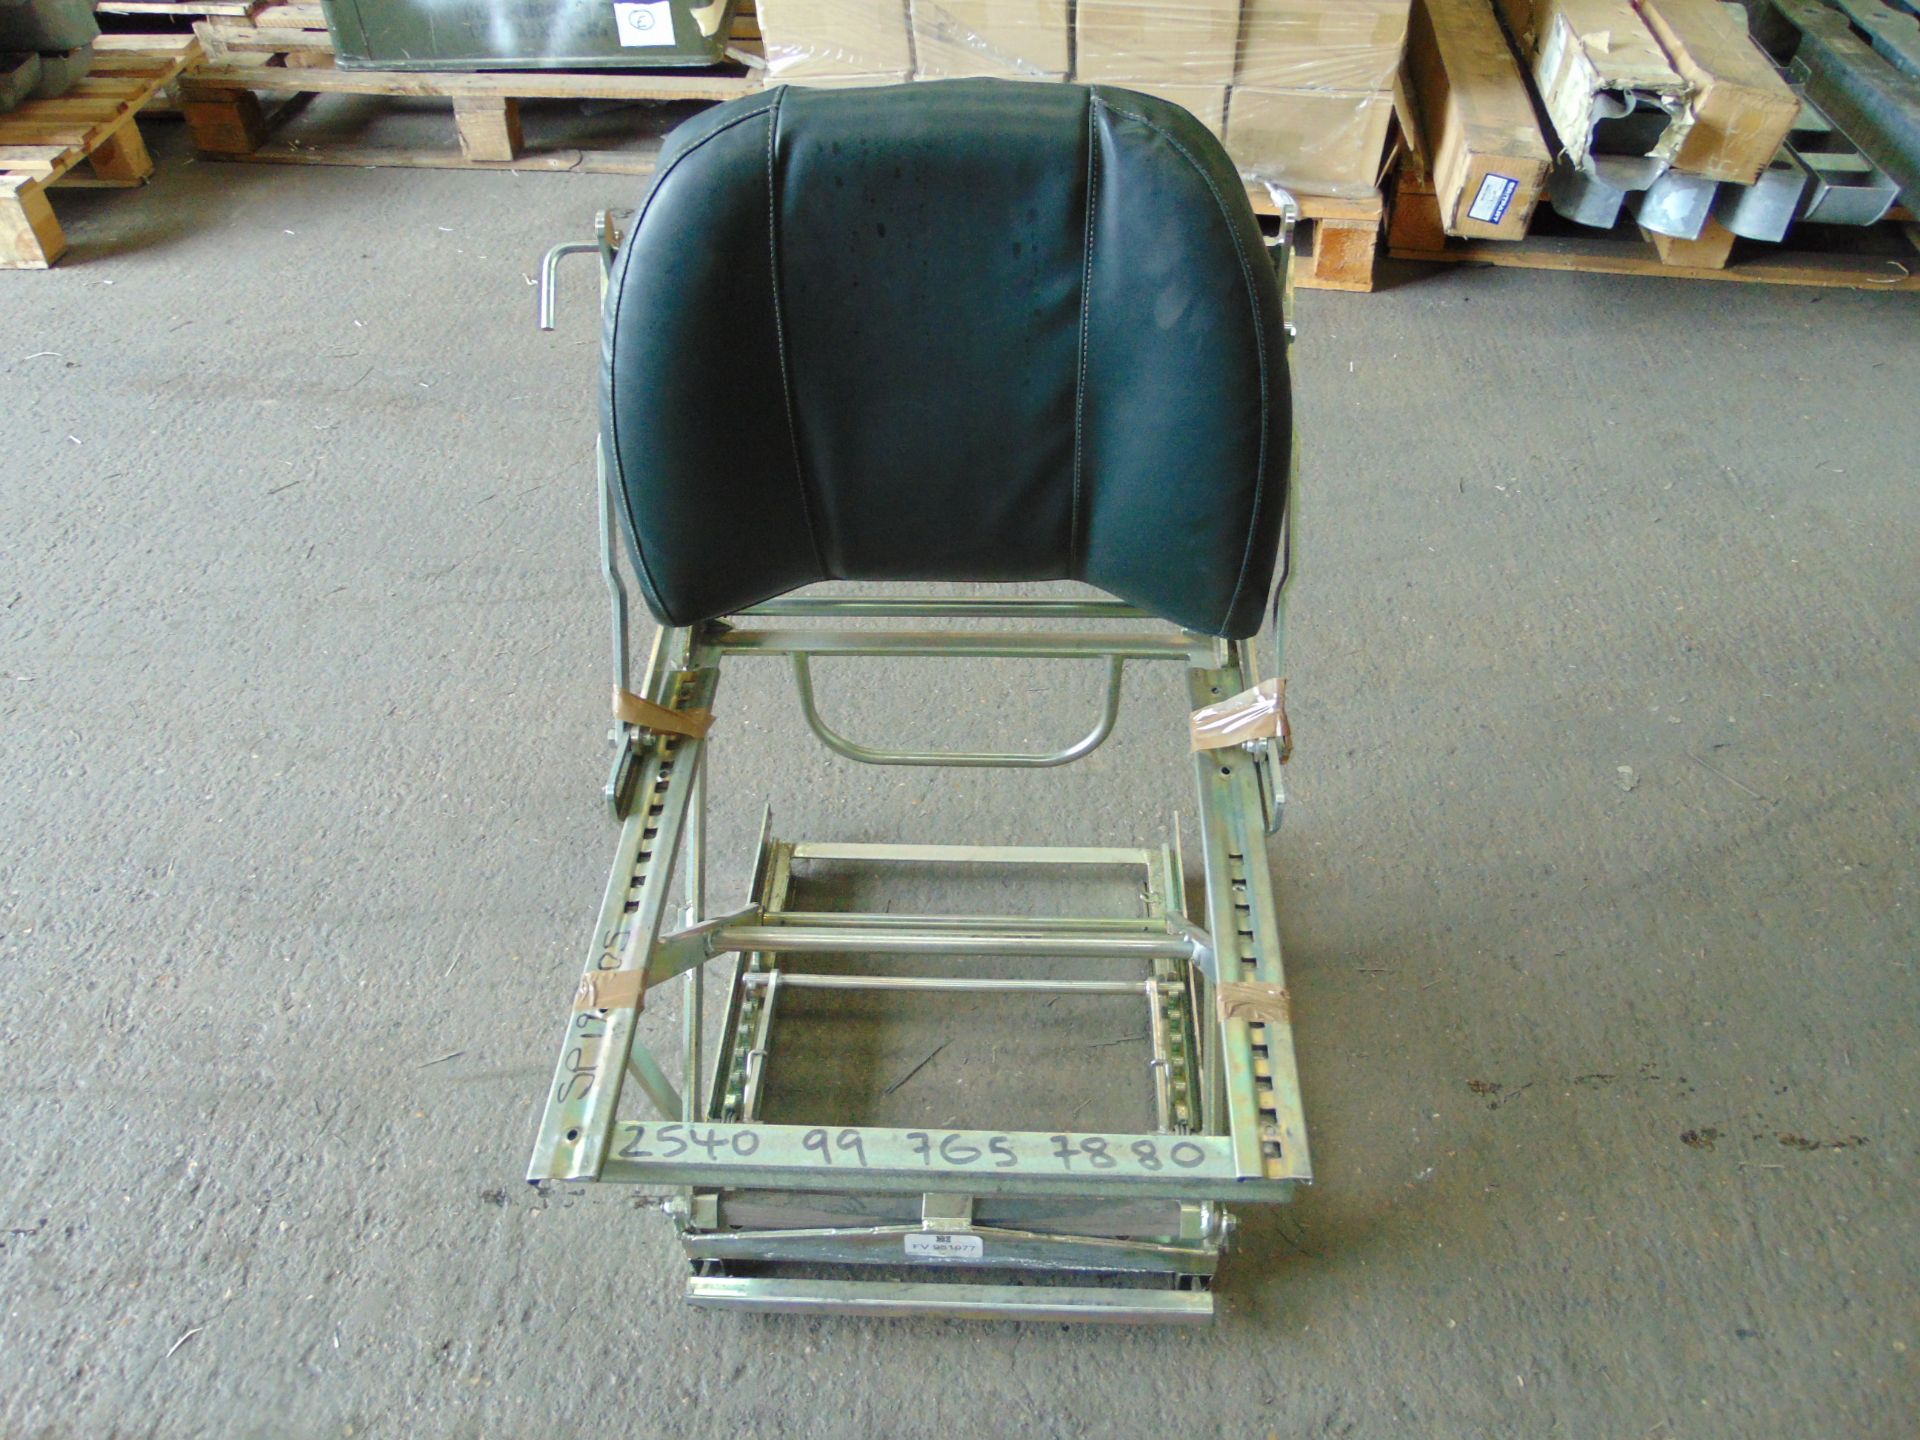 FV432 Drivers Seat - Image 2 of 7